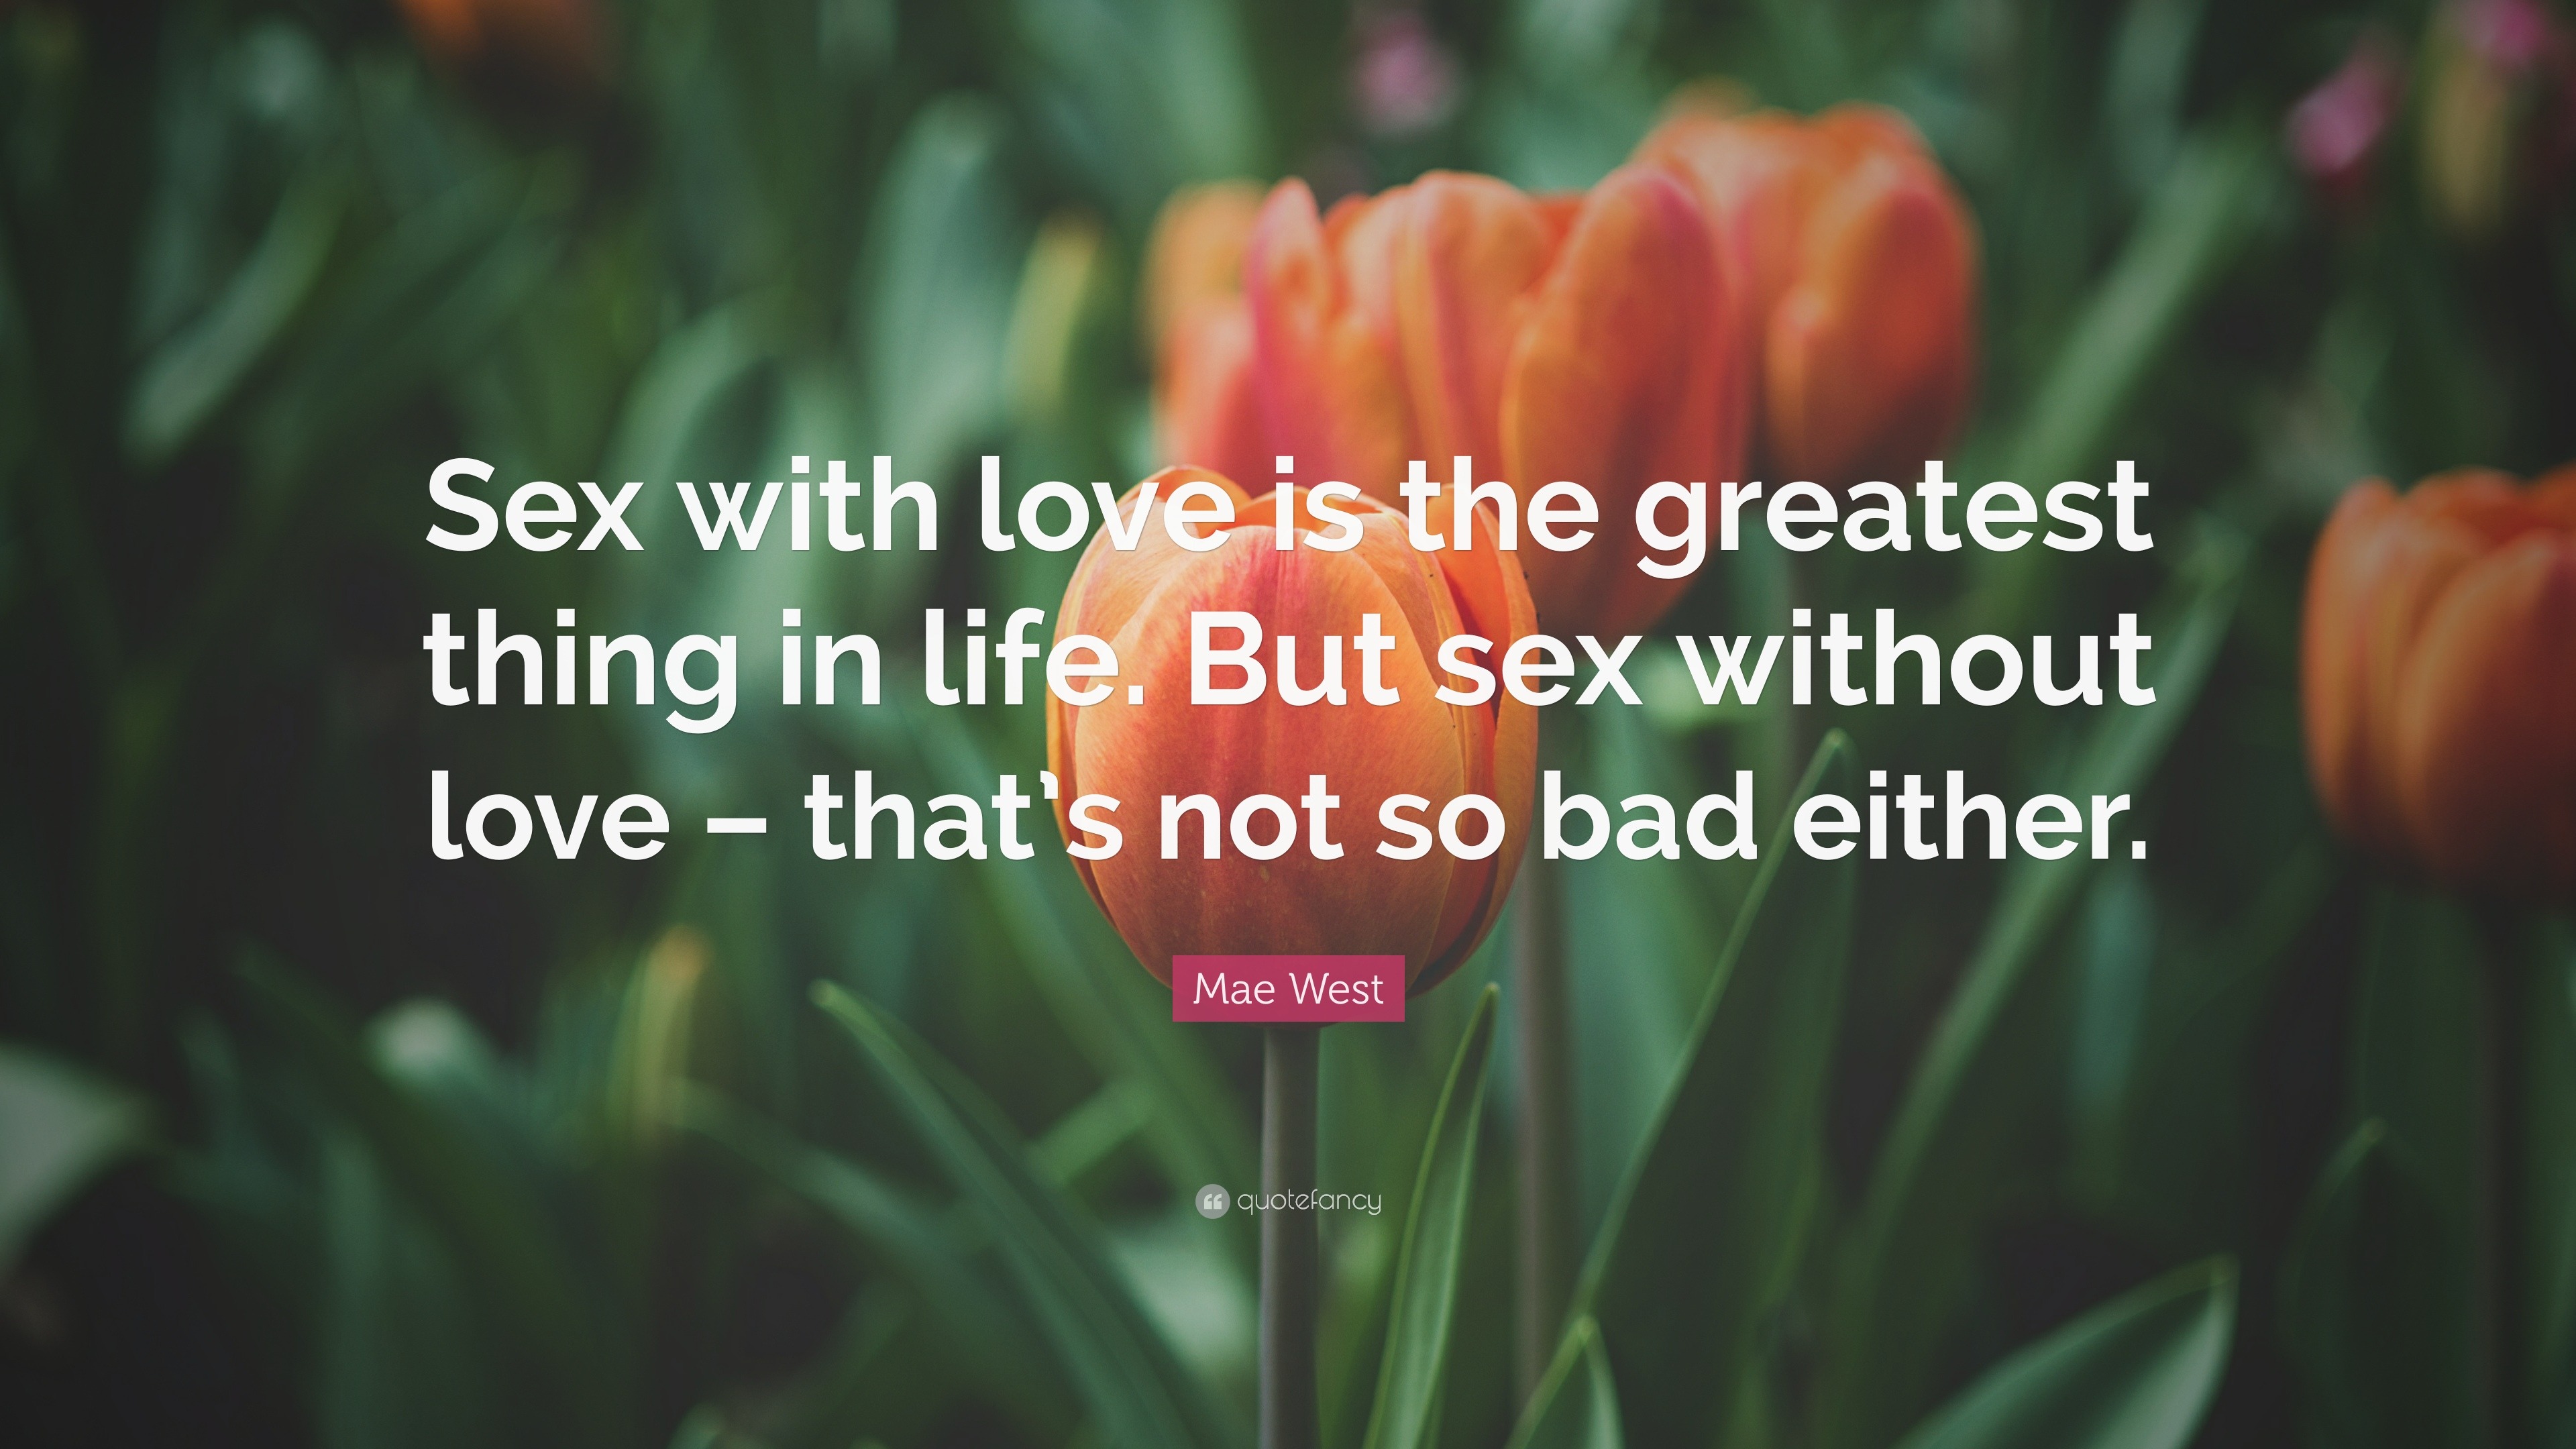 Mae West Quote “ with love is the greatest thing in life But